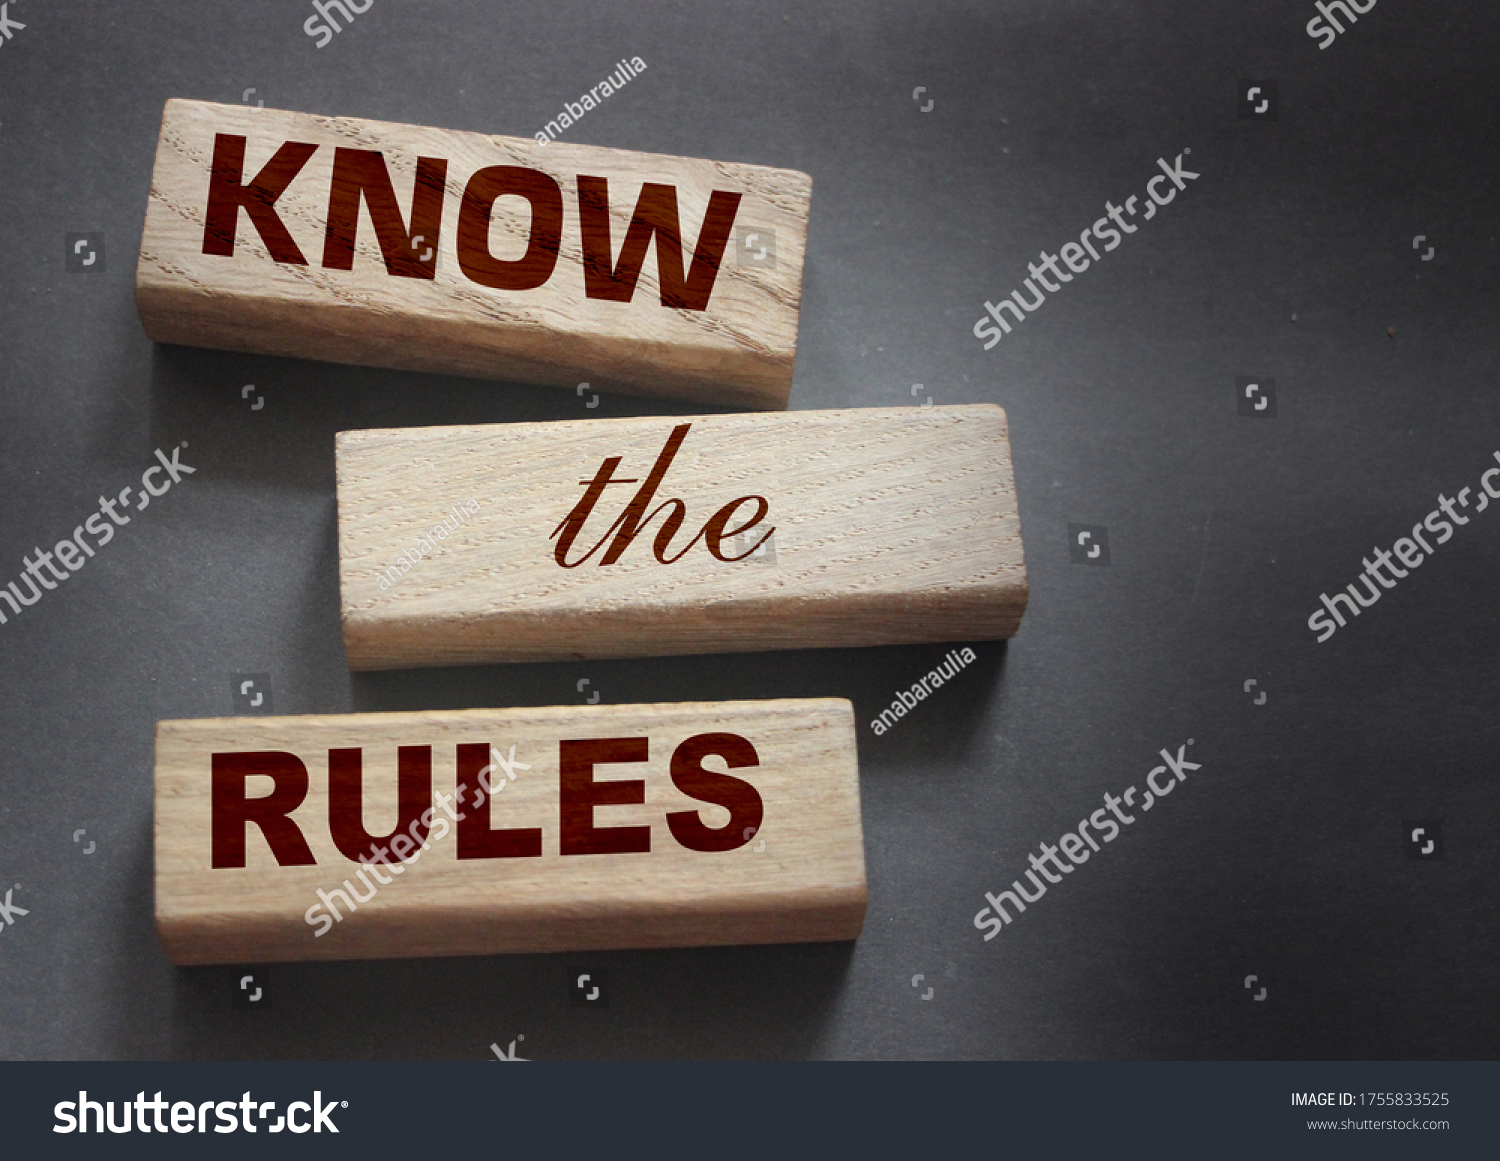 Know the rules word on wooden blocks isolated on dark grey background. business process regulation concept. #1755833525